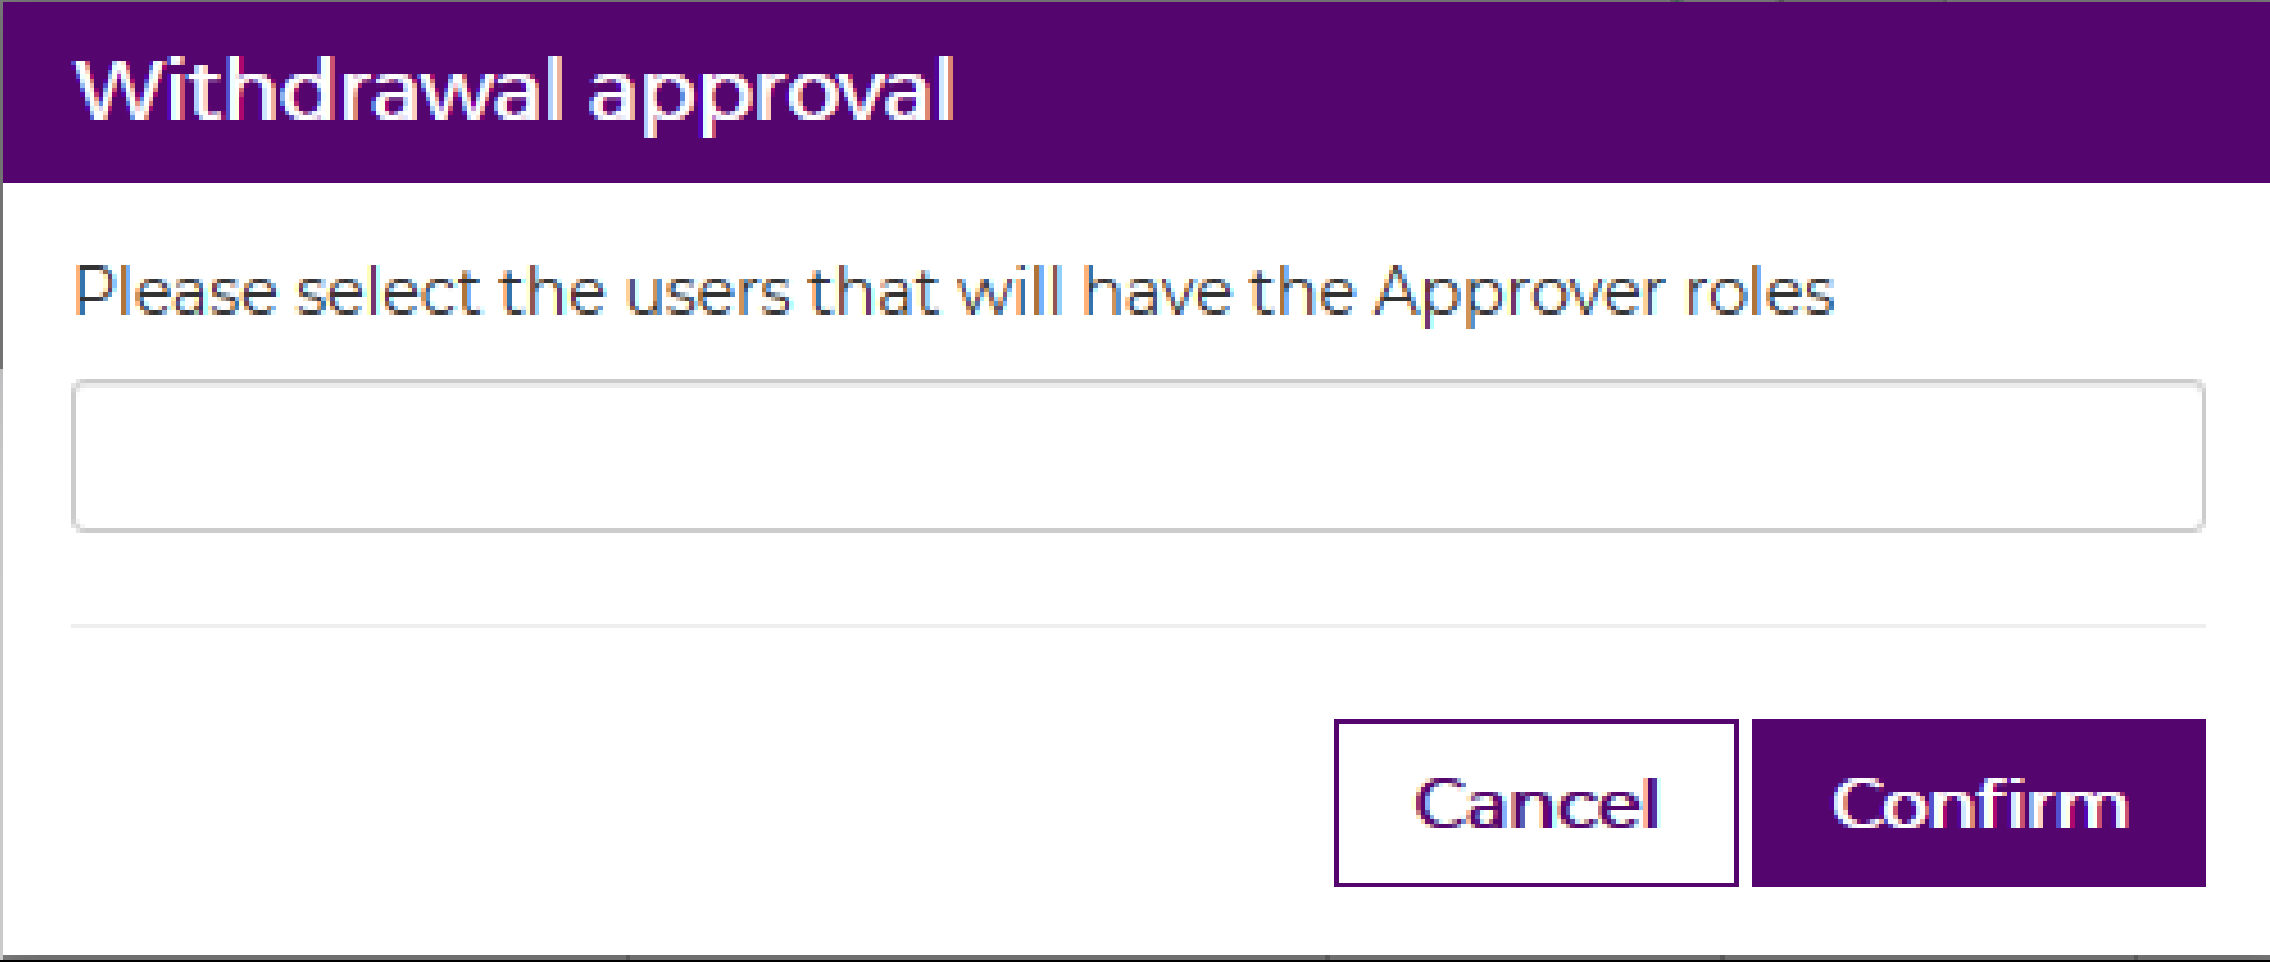 Withdrawal approval